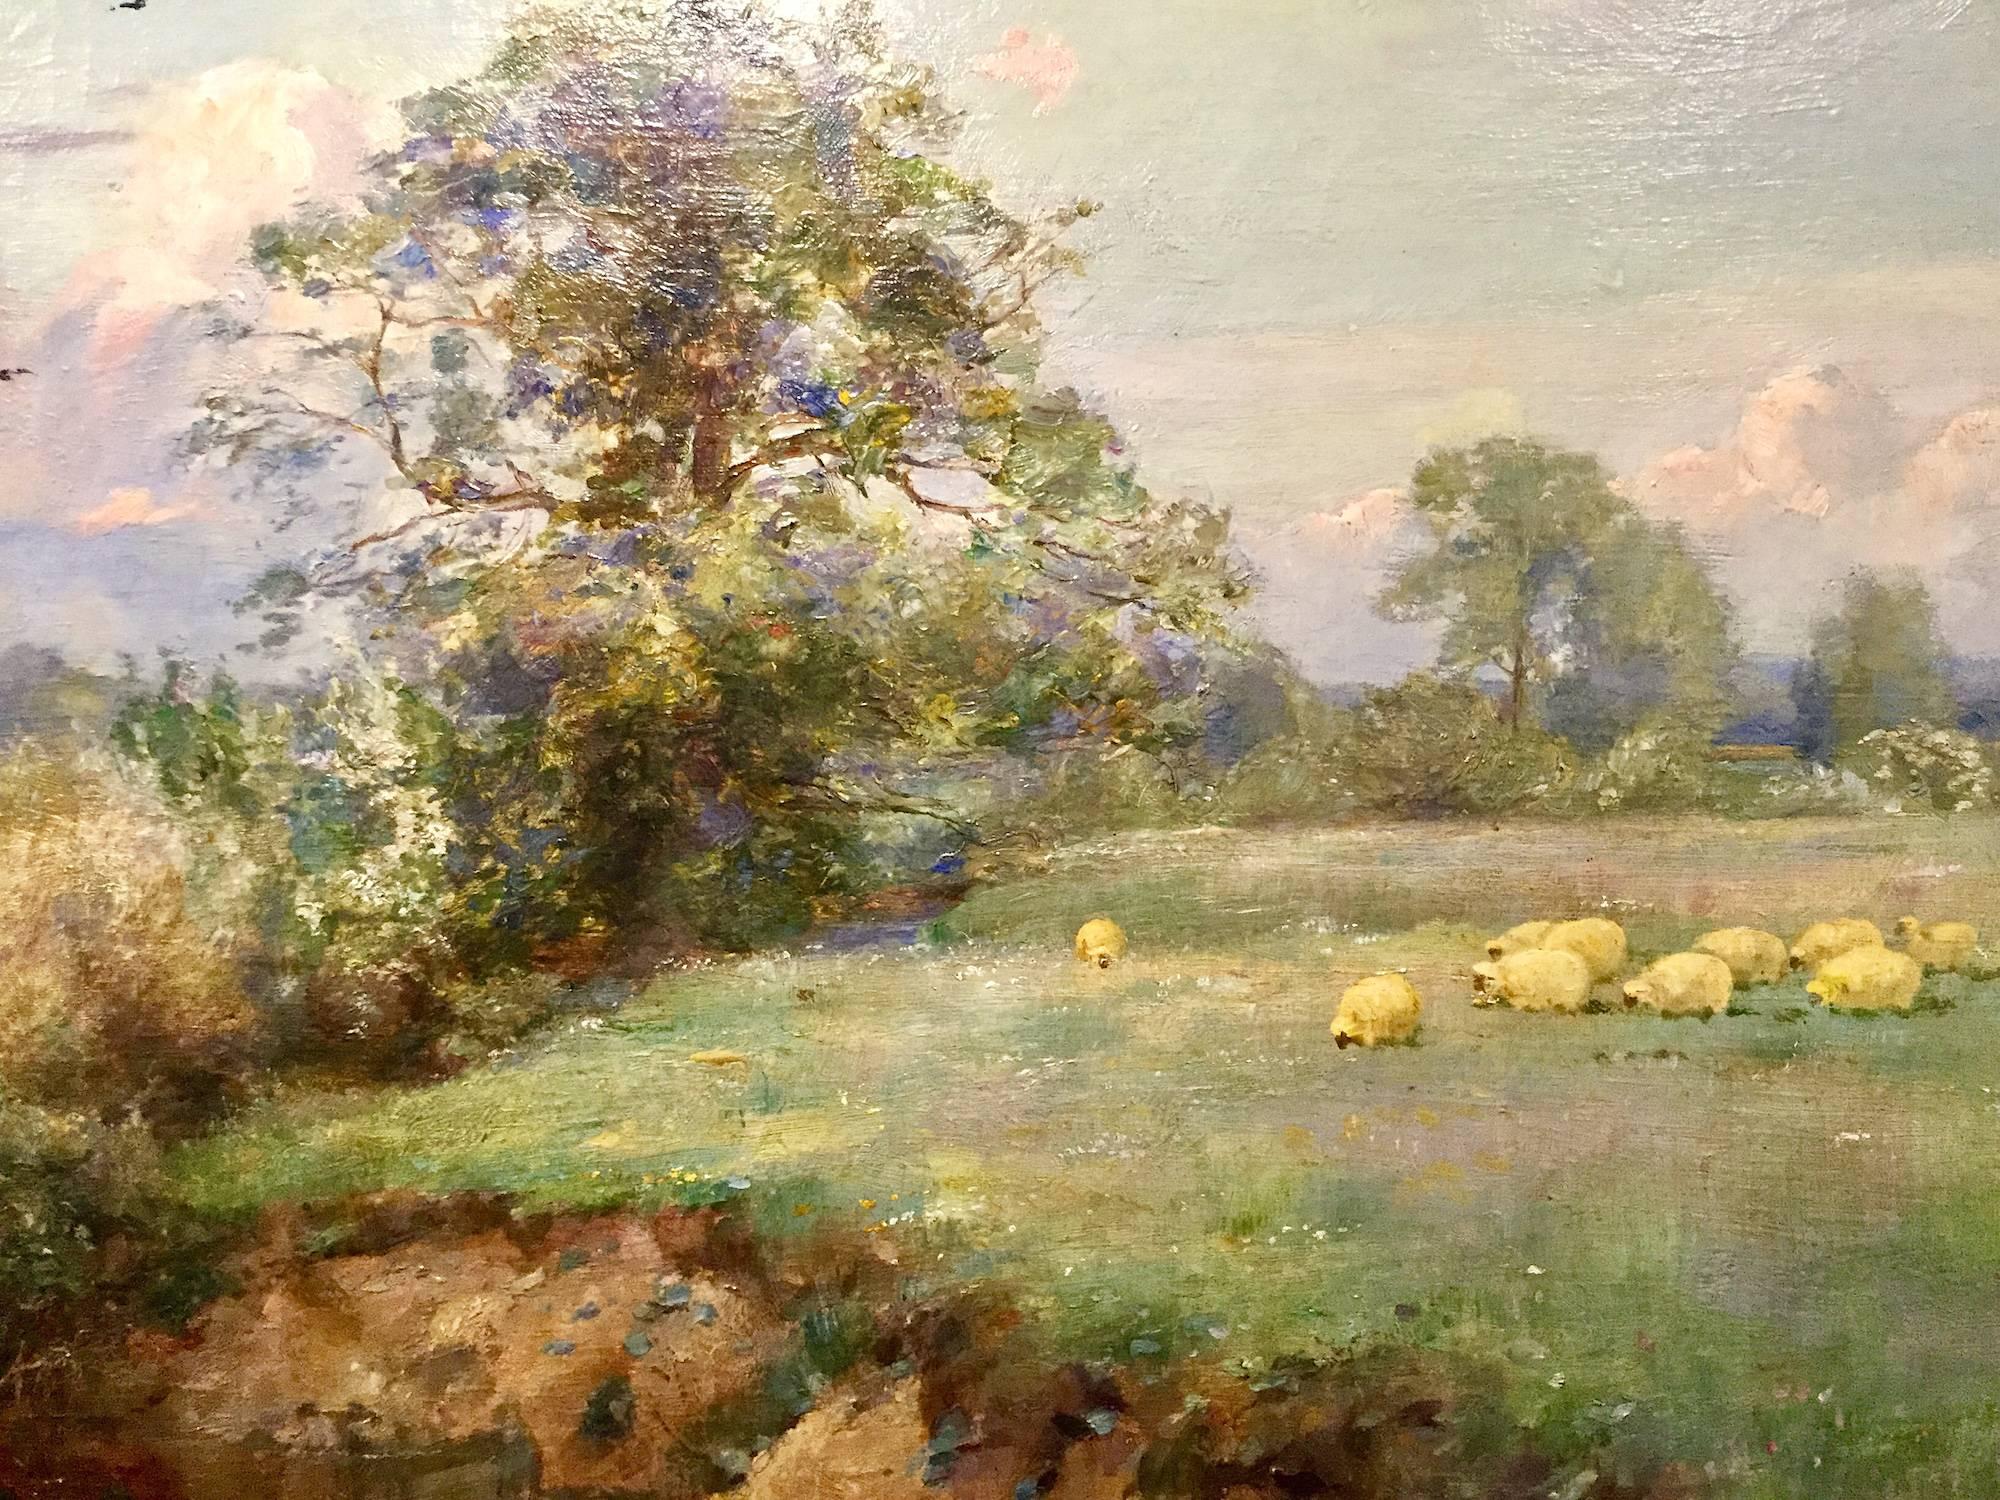 Grazing Sheep An English Landscape 20th Century modern by Sir Alfred East RA